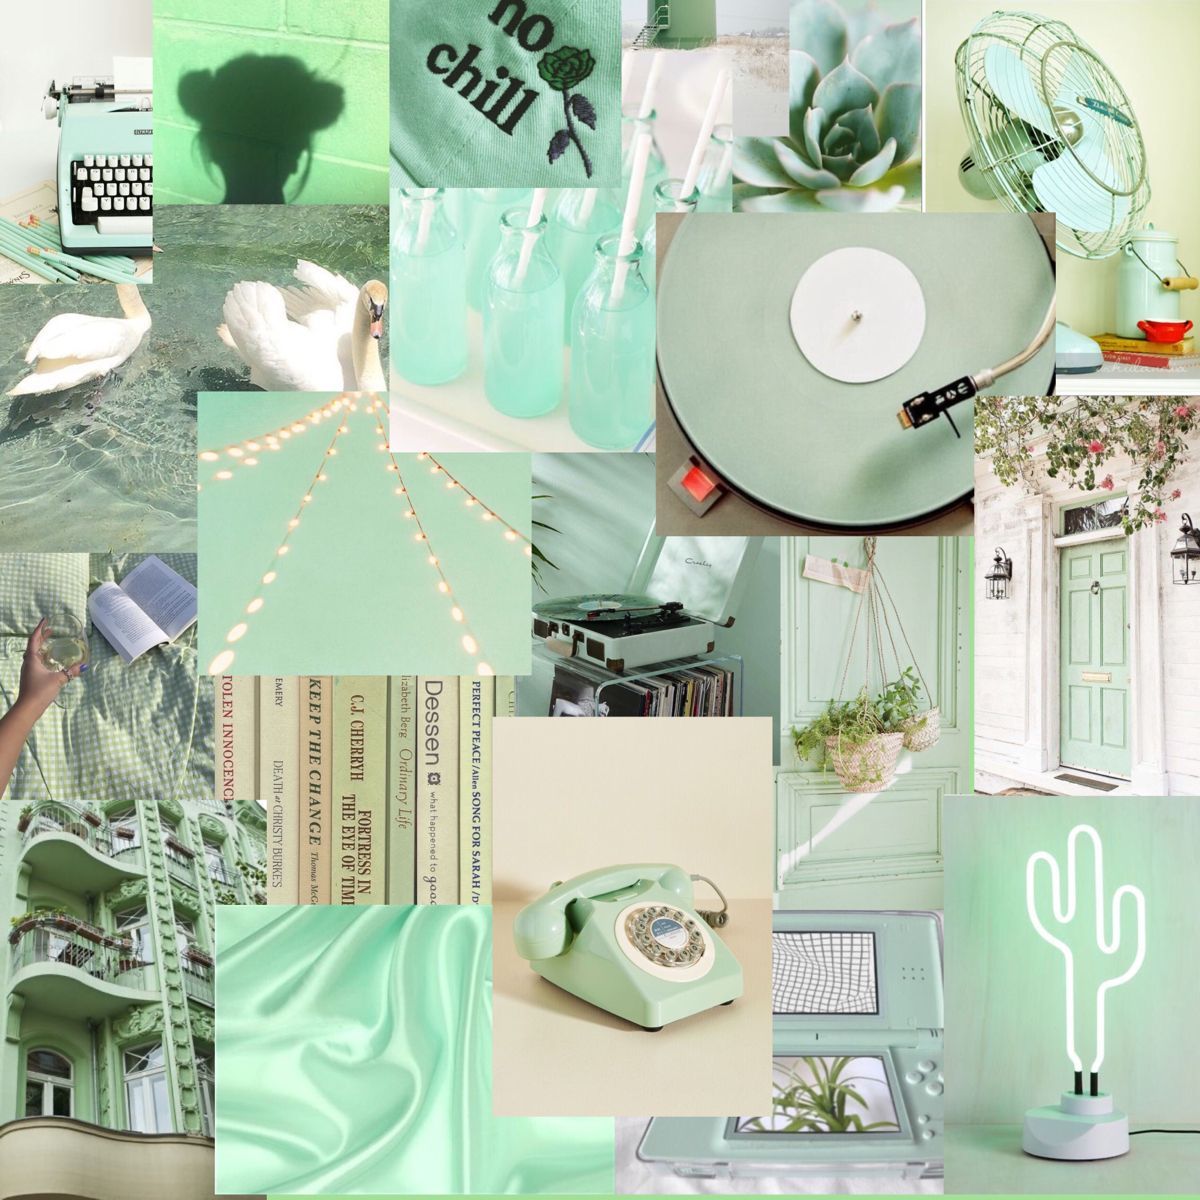 Collage of images in shades of green, including a phone, books, plants, and a wall. - Soft green, light green